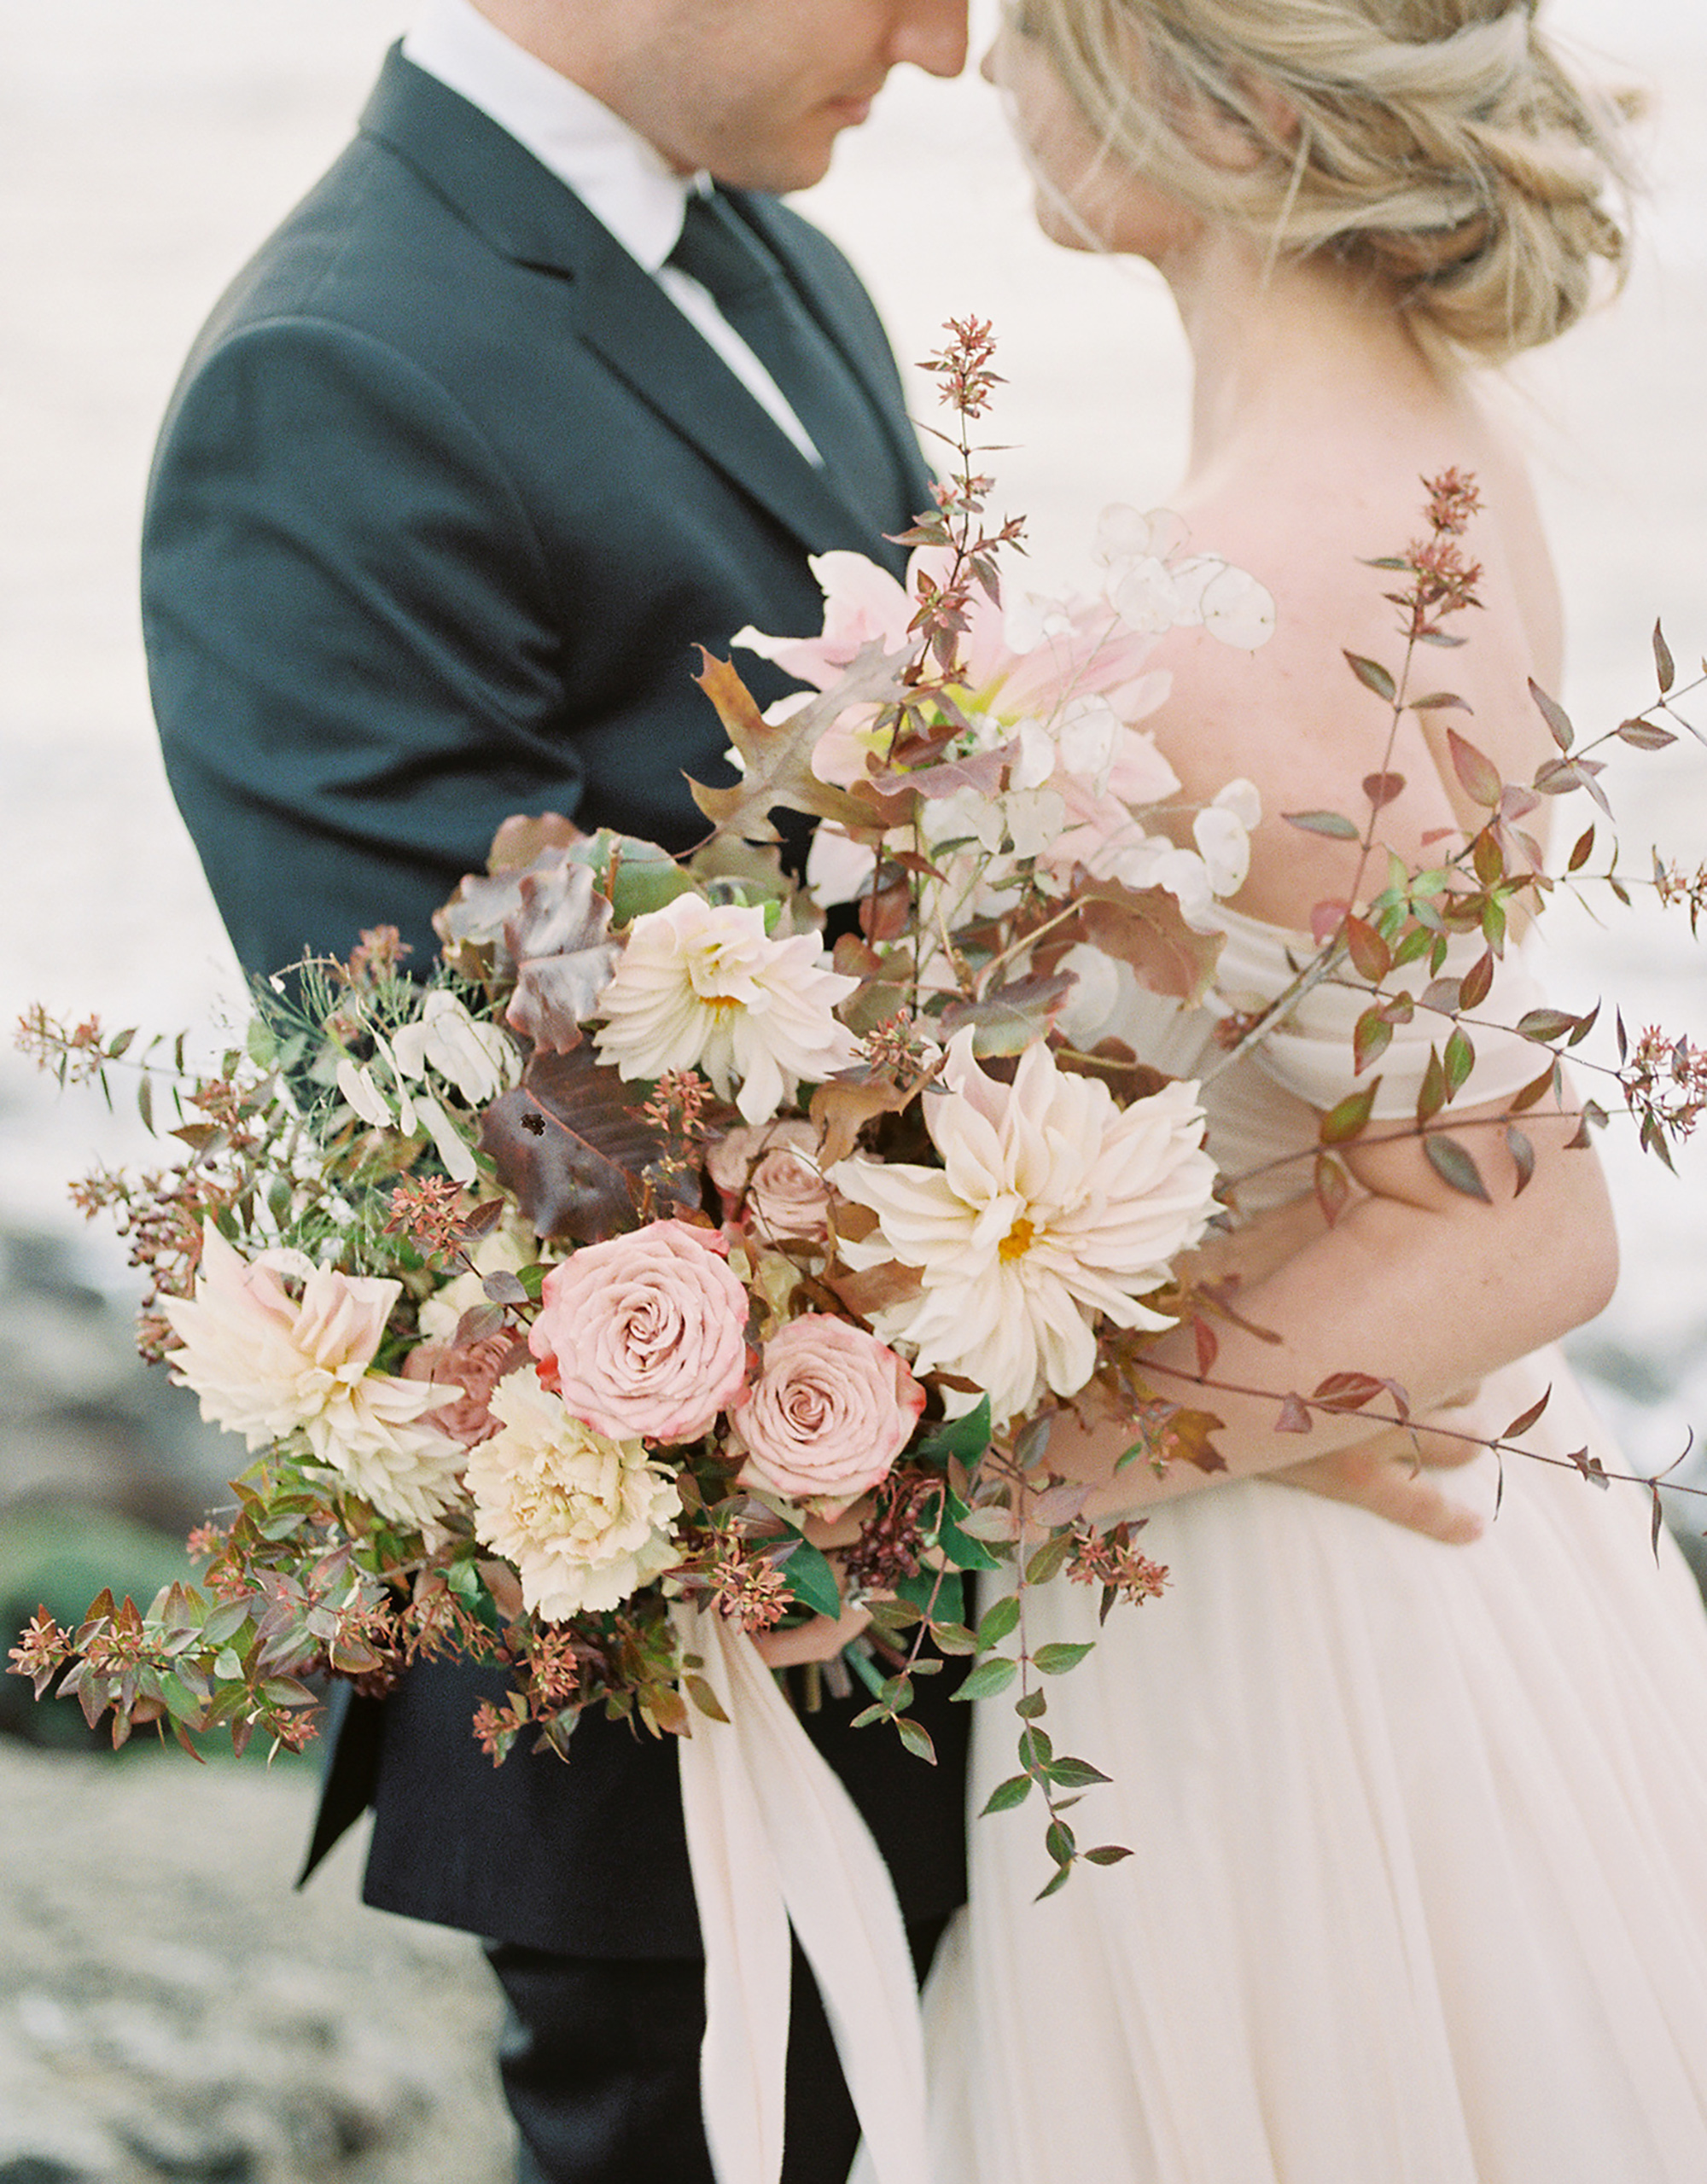 San Francisco wedding florals by The Bloomery Co., photographed by San Francisco wedding photographer Tenth & Grace.